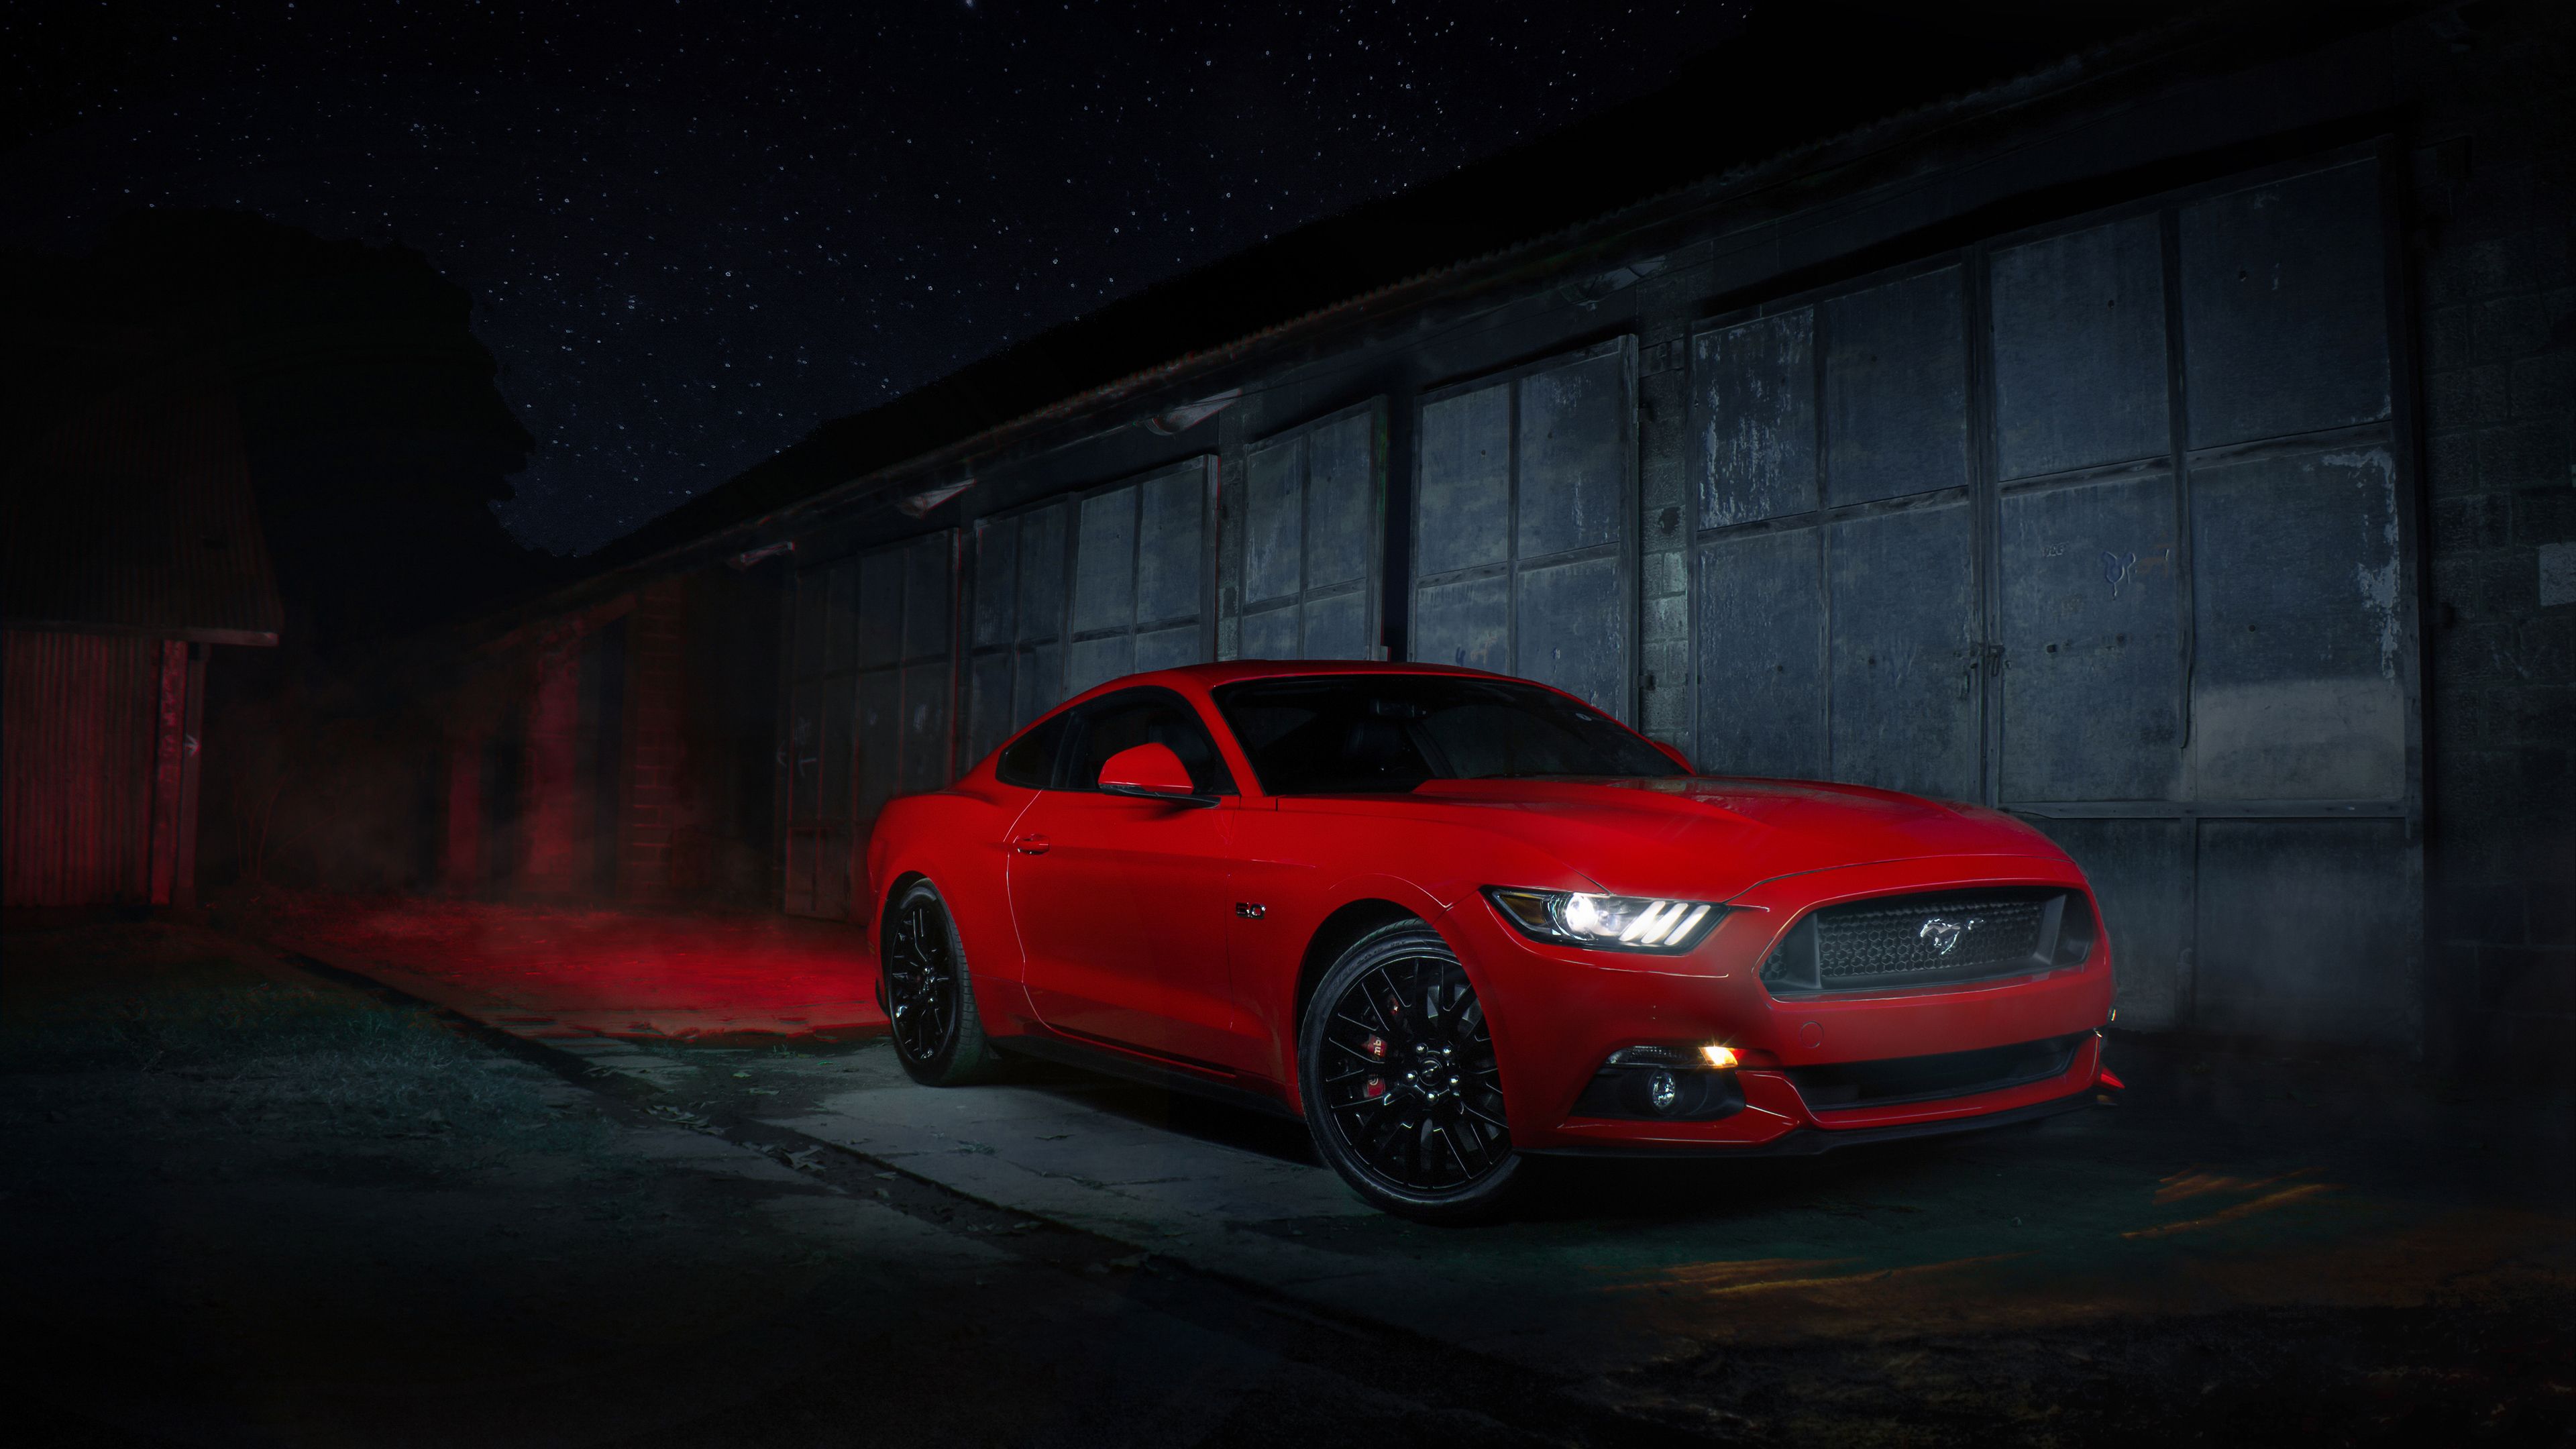 Red Ford Mustang near the wall at night wallpaper and image, picture, photo